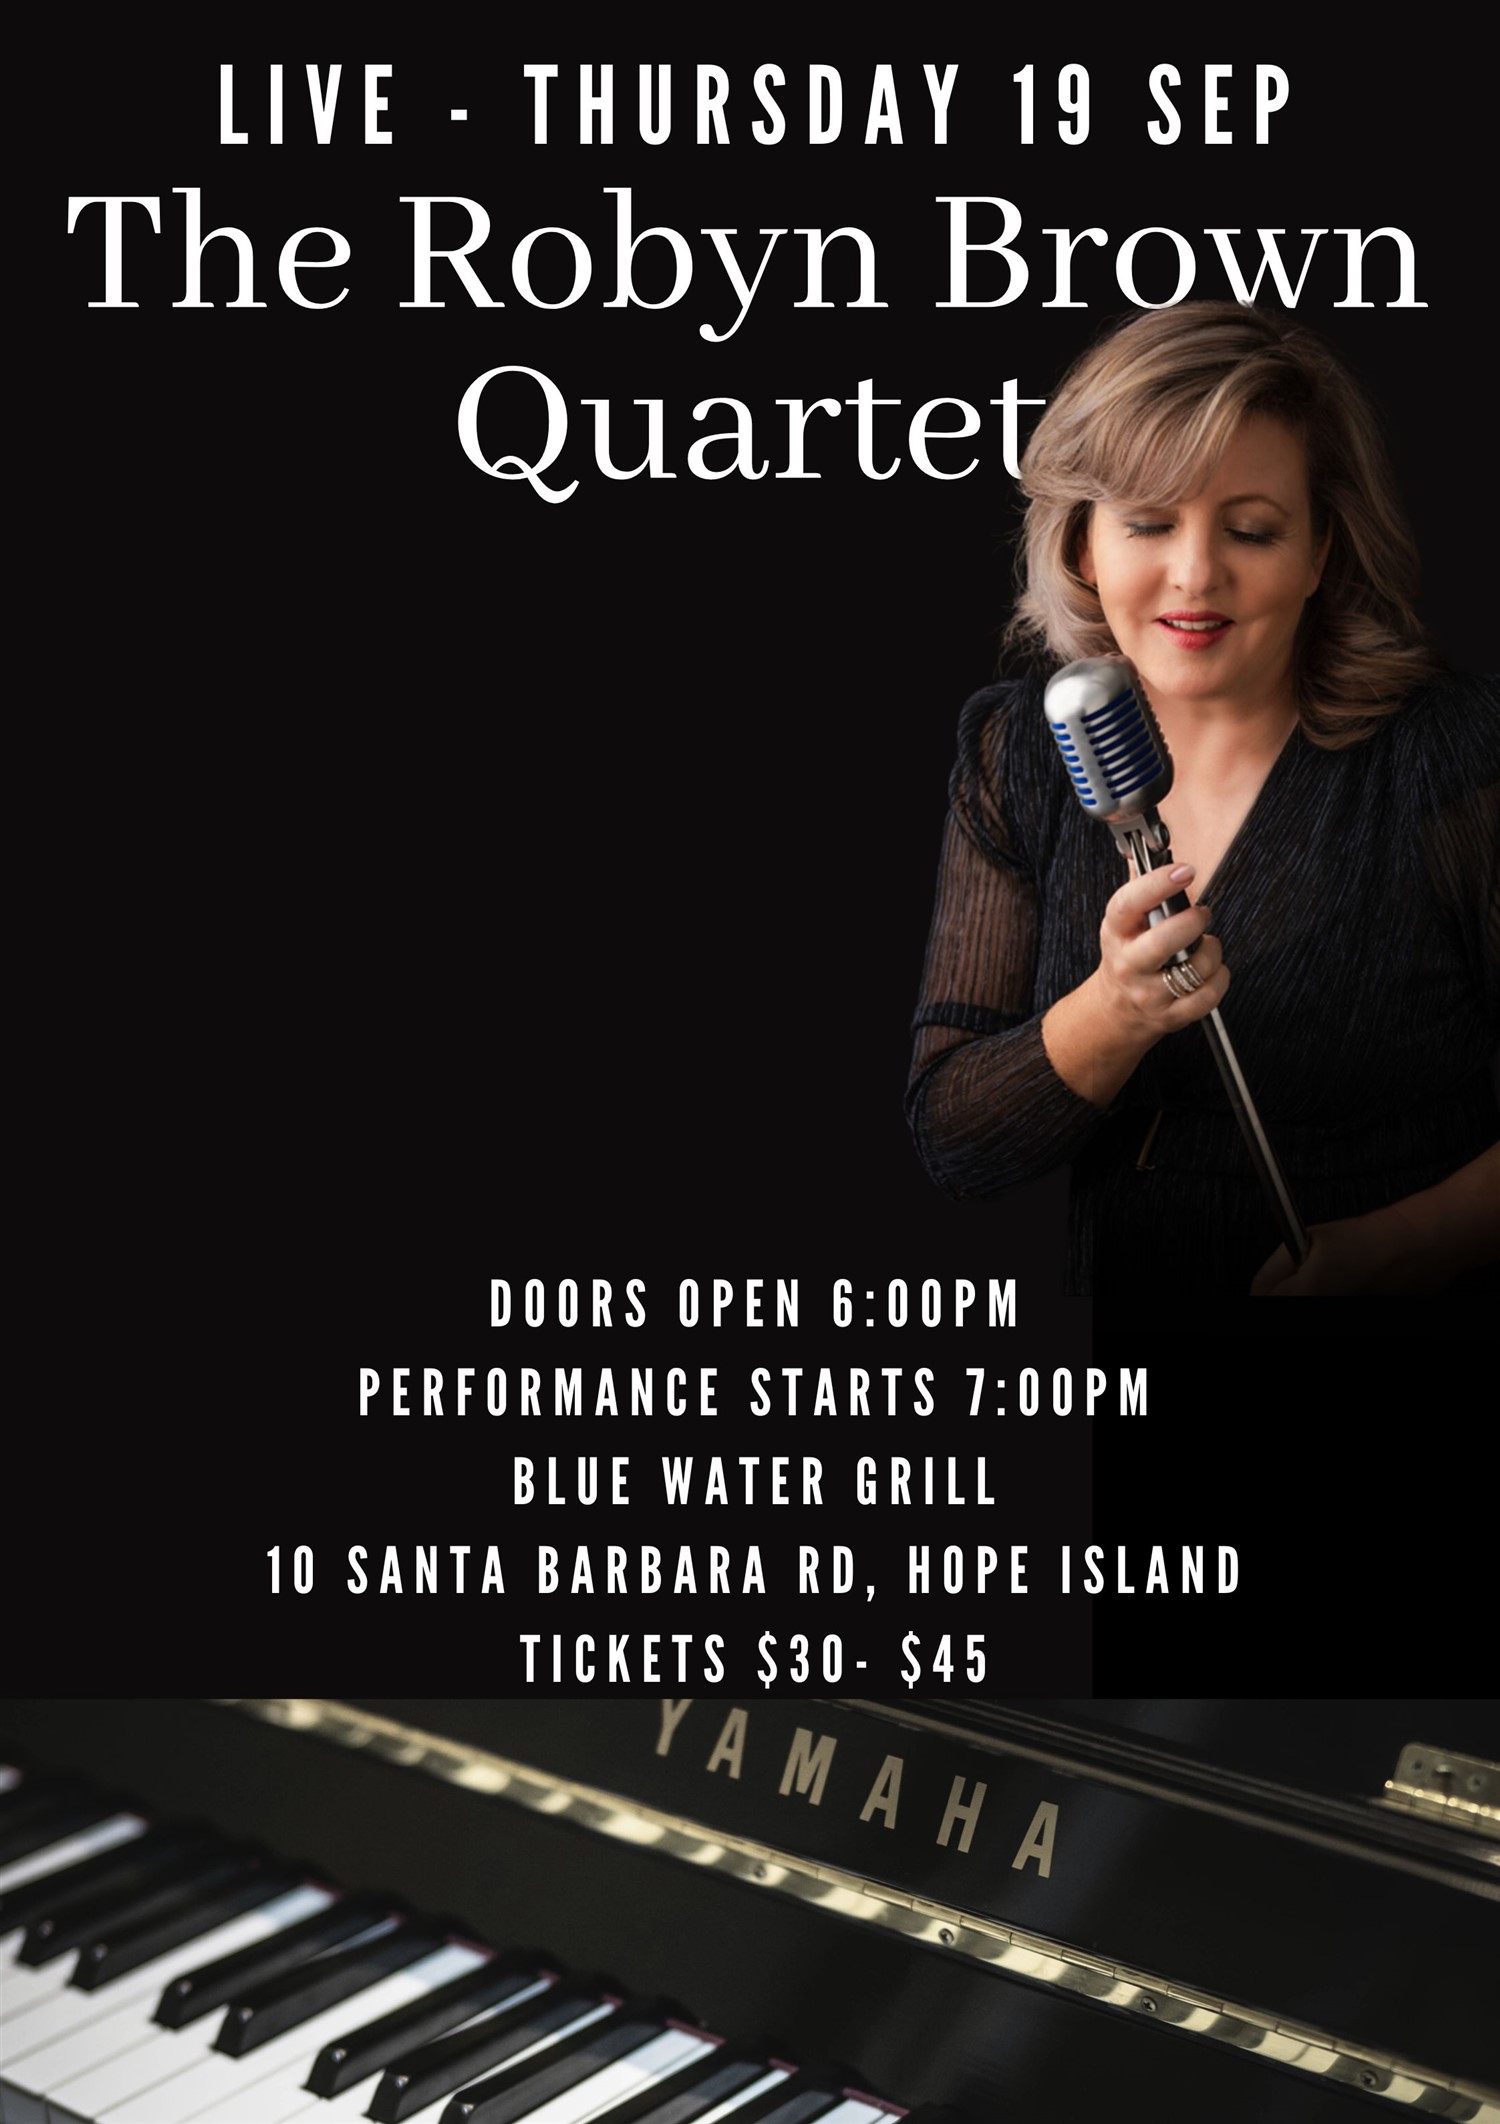 The Robyn Brown Quartet  on Sep 19, 18:00@Hope Island Jazz - Blue Water Grill - Buy tickets and Get information on Hope Island Jazz hopeislandjazz.com.au